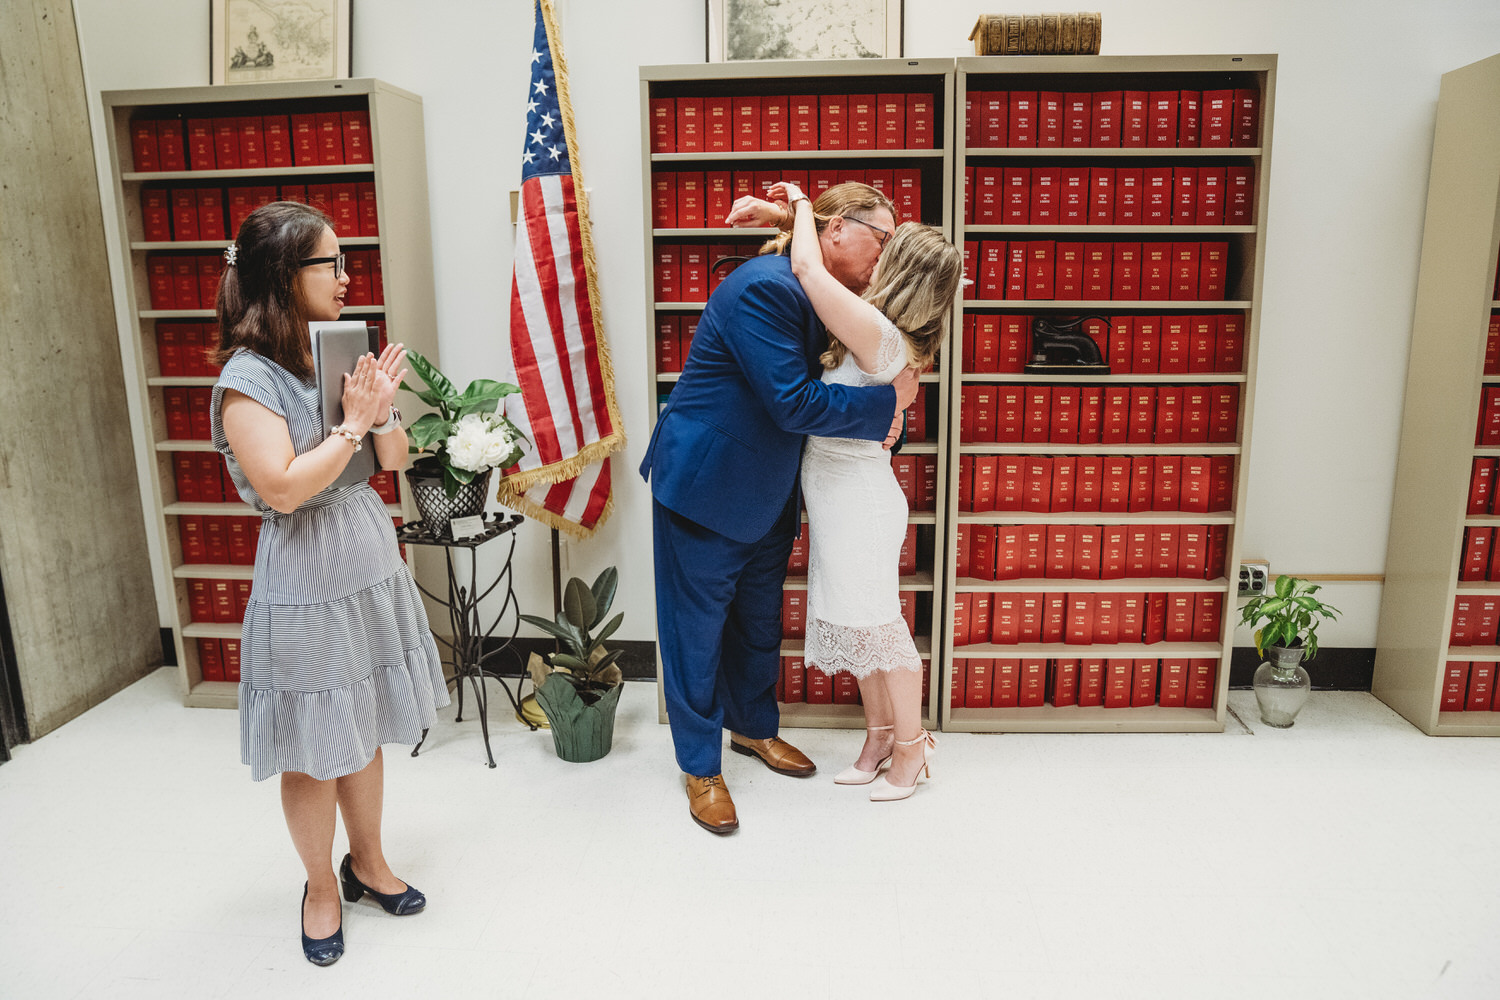 A couple exchanging vows in front of a bookcase at their Boston City Hall wedding.